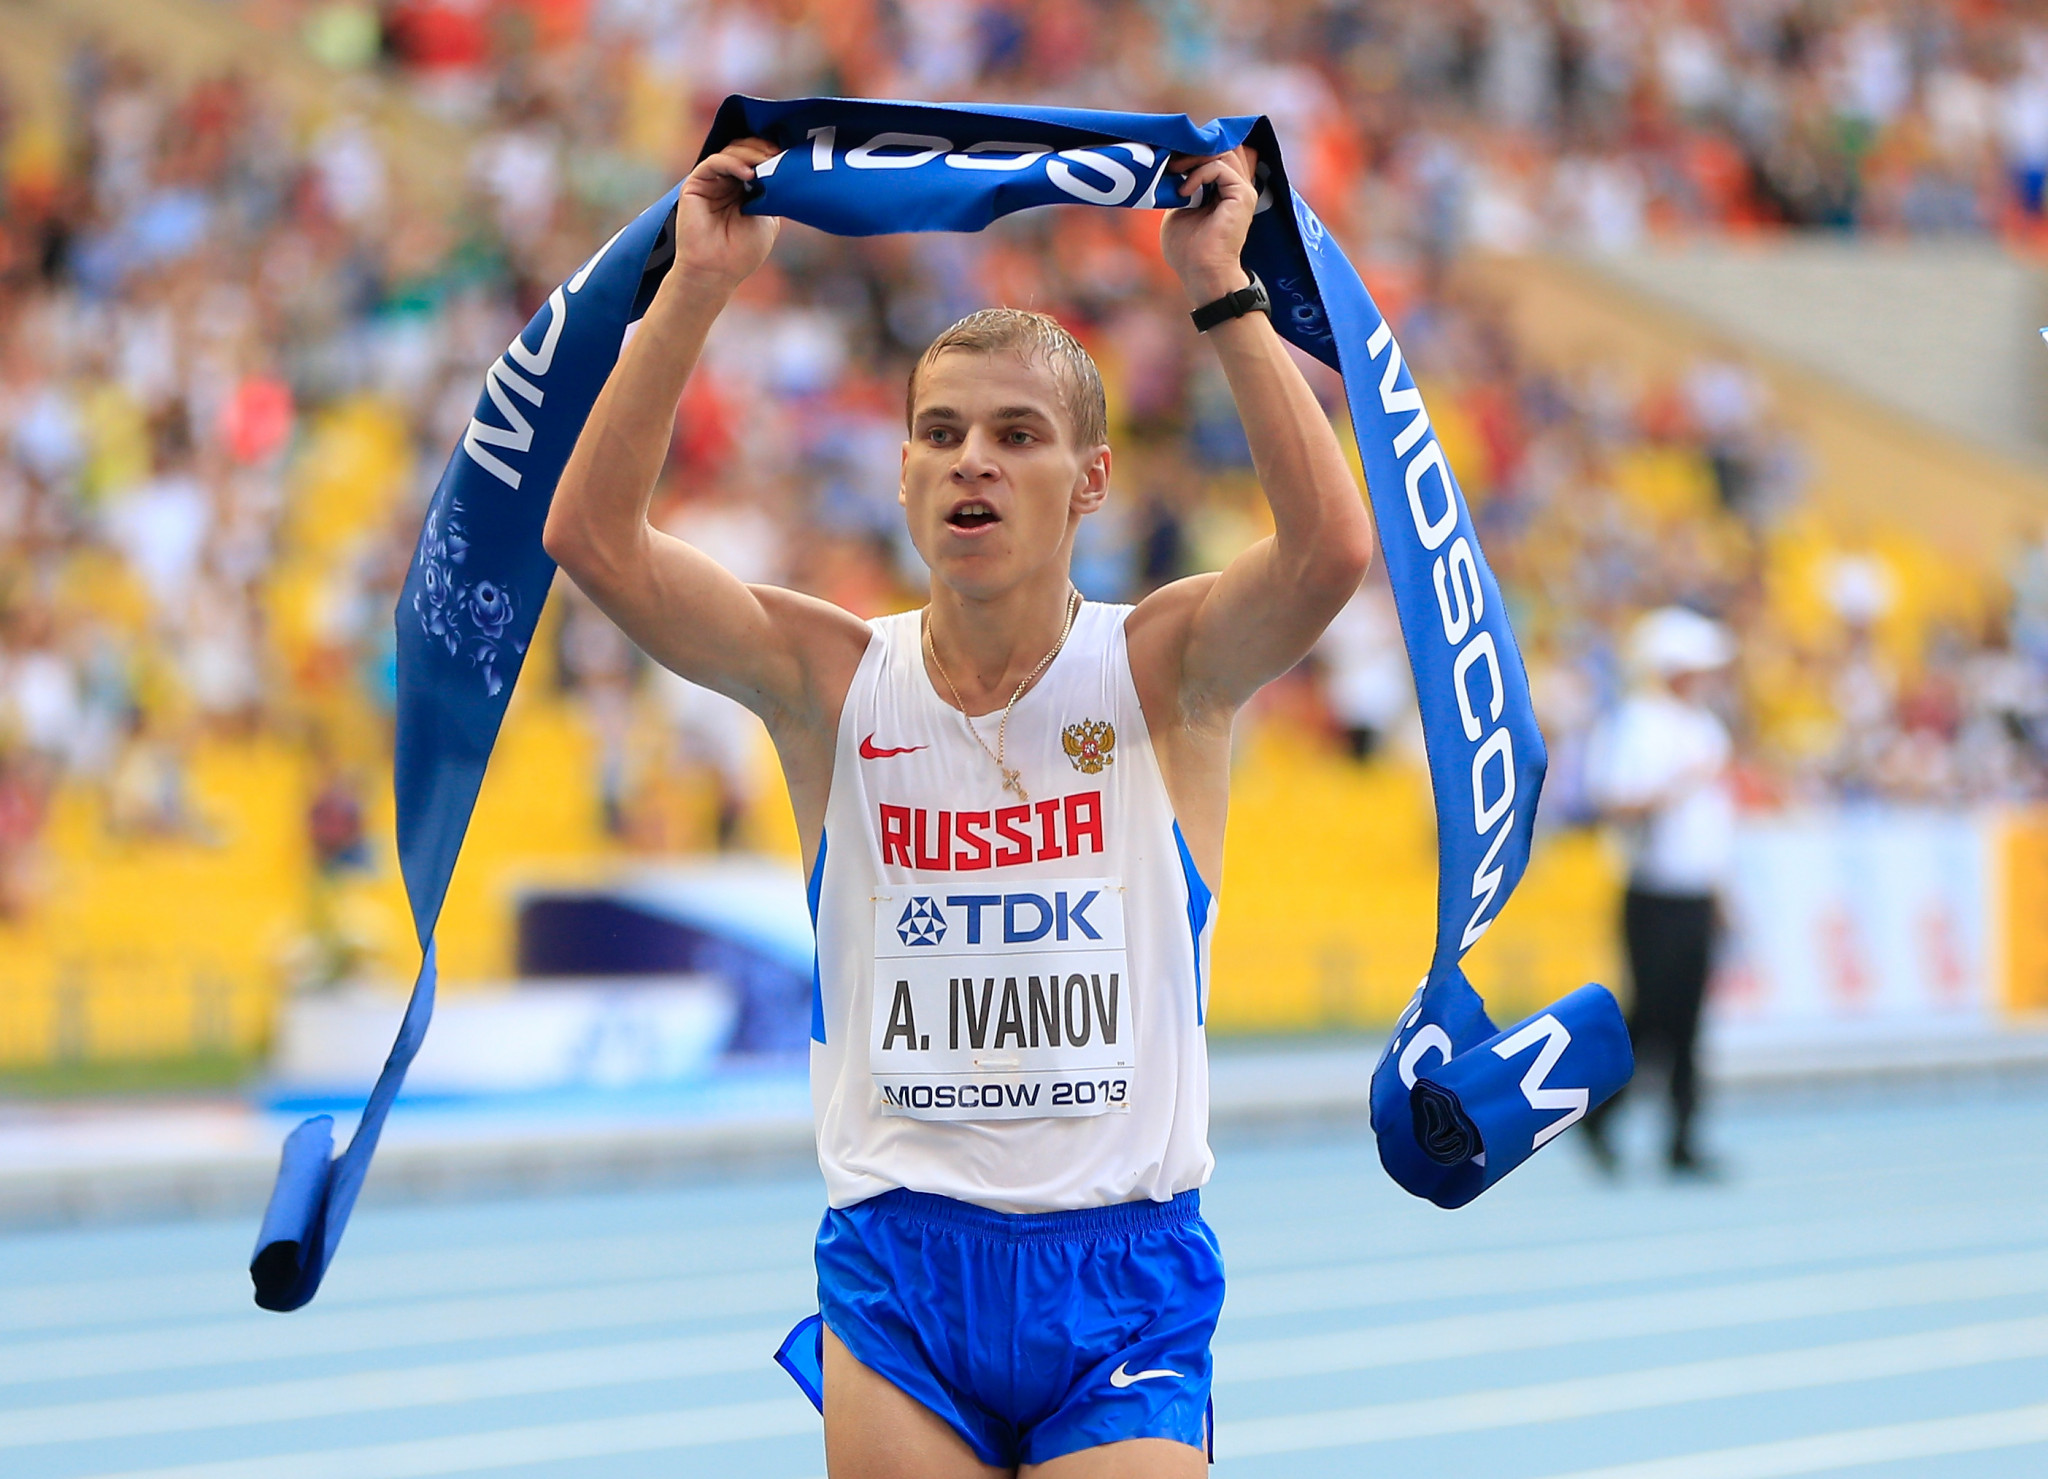 AIU finds Russian race walkers Ivanov and Yerokhin guilty of further doping offences